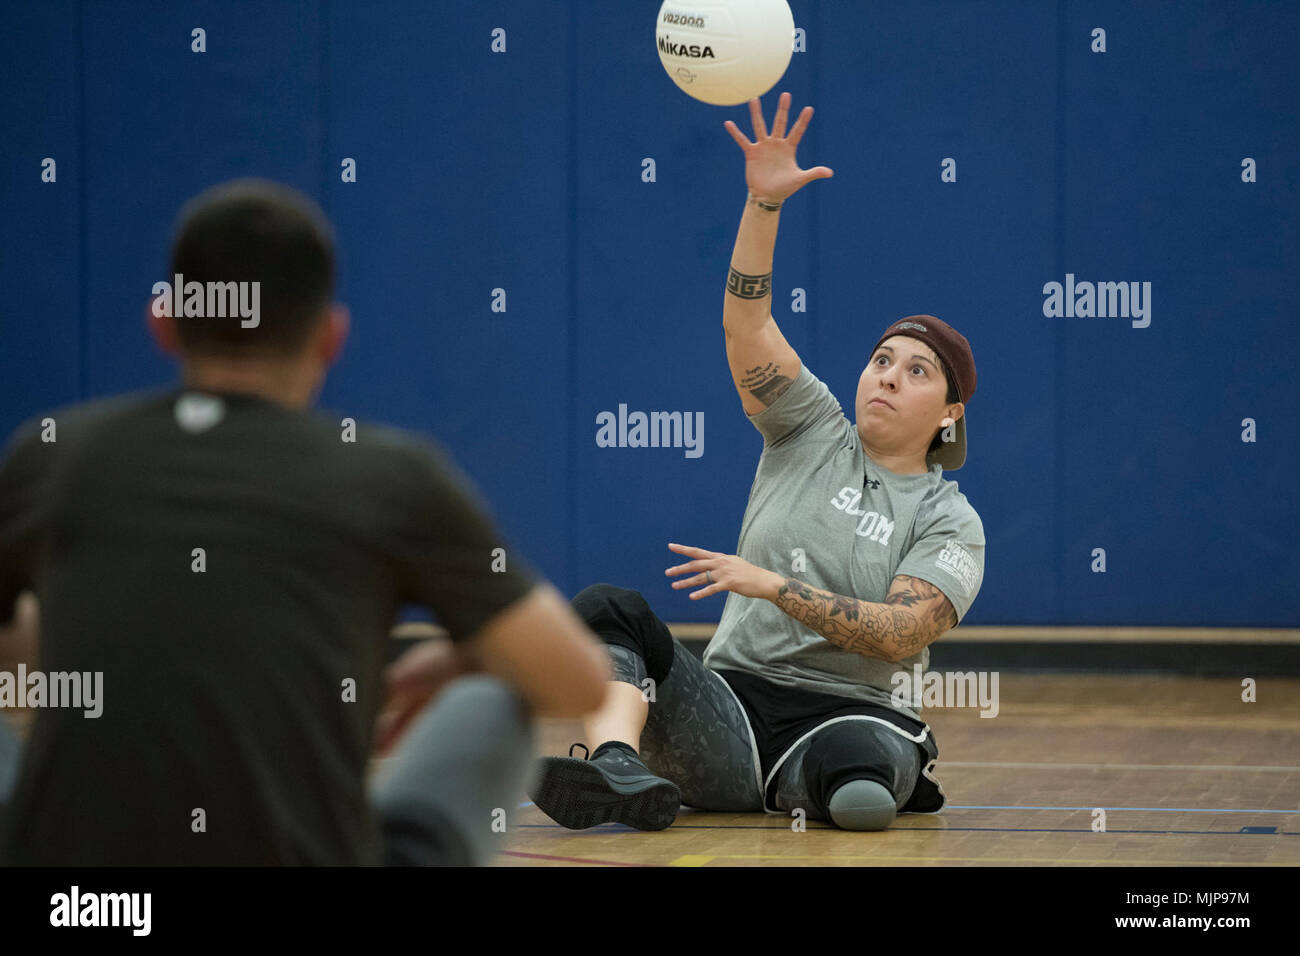 USSOCOM's Army Sgt. Lauren Montoya practices sitting volleyball during training for the 2018 DoD Warrior Games at MacDill Air Force Base in Florida on March 20, 2018.  Participation in USSOCOM Warrior Care Program military adaptive sport events throughout the year enhances SOF athletes' mental and physical rehabilitation, aiding in their reintegration or transition.    (DoD Armed Forces and civilians displaying courage bravery dedication commitment and sacrifice Stock Photo